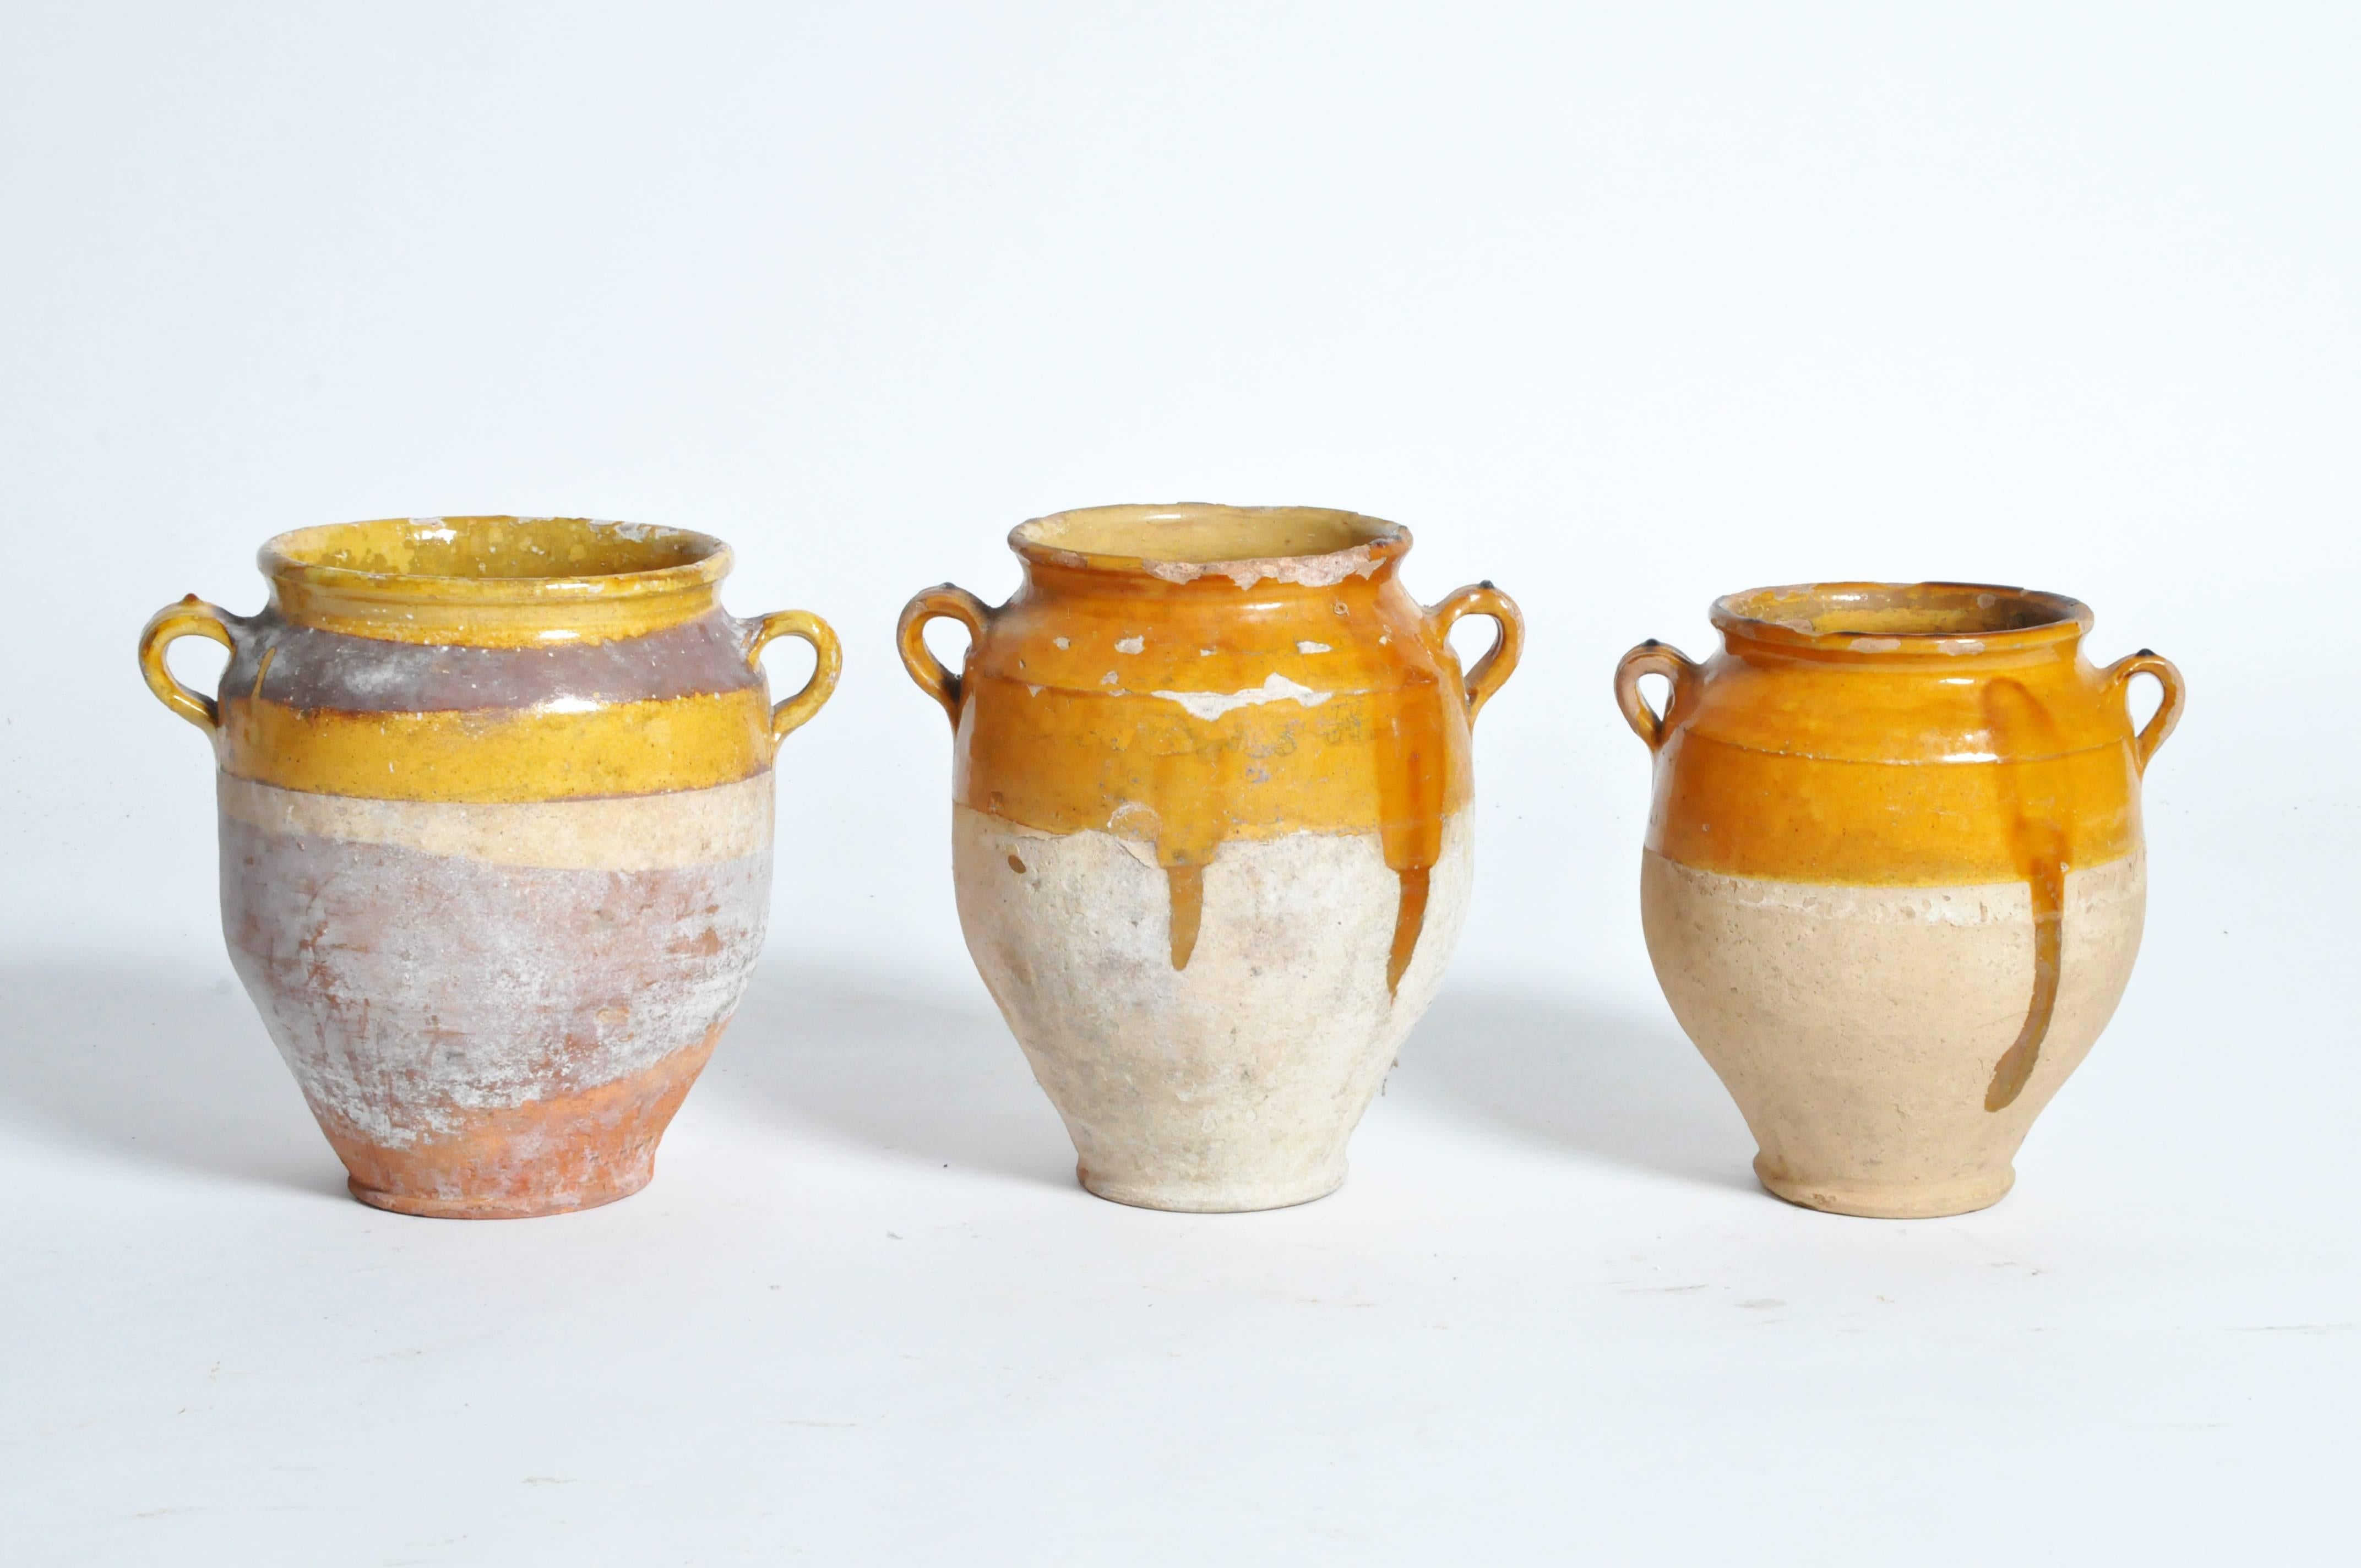 These ceramic glazed confit jars are from Provence, France, circa 1890. Sizes may vary slightly.